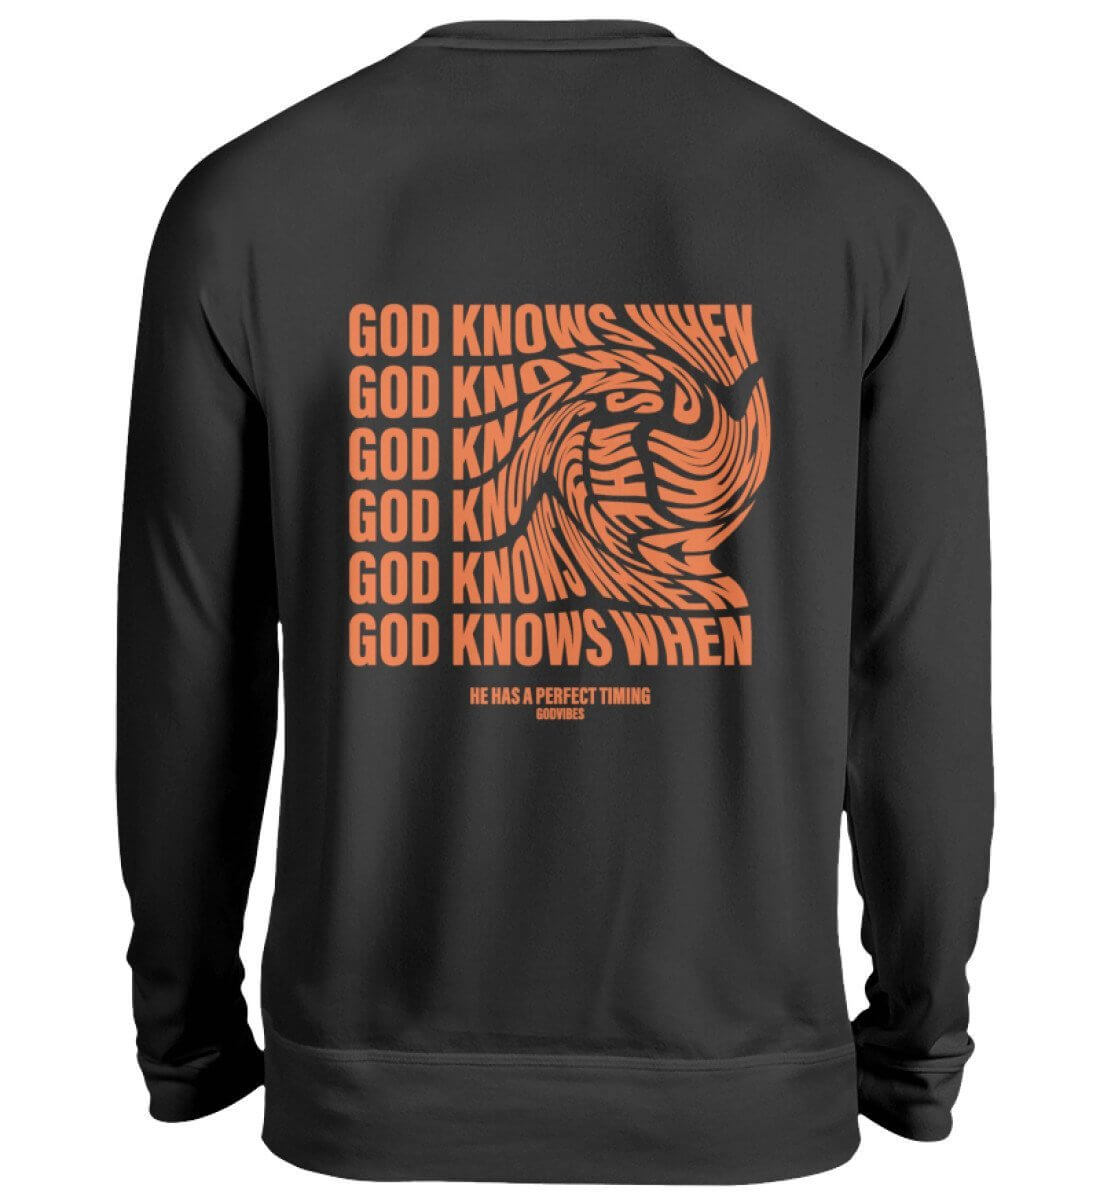 GOD KNOWS WHEN | Unisex Sweater - GODVIBES